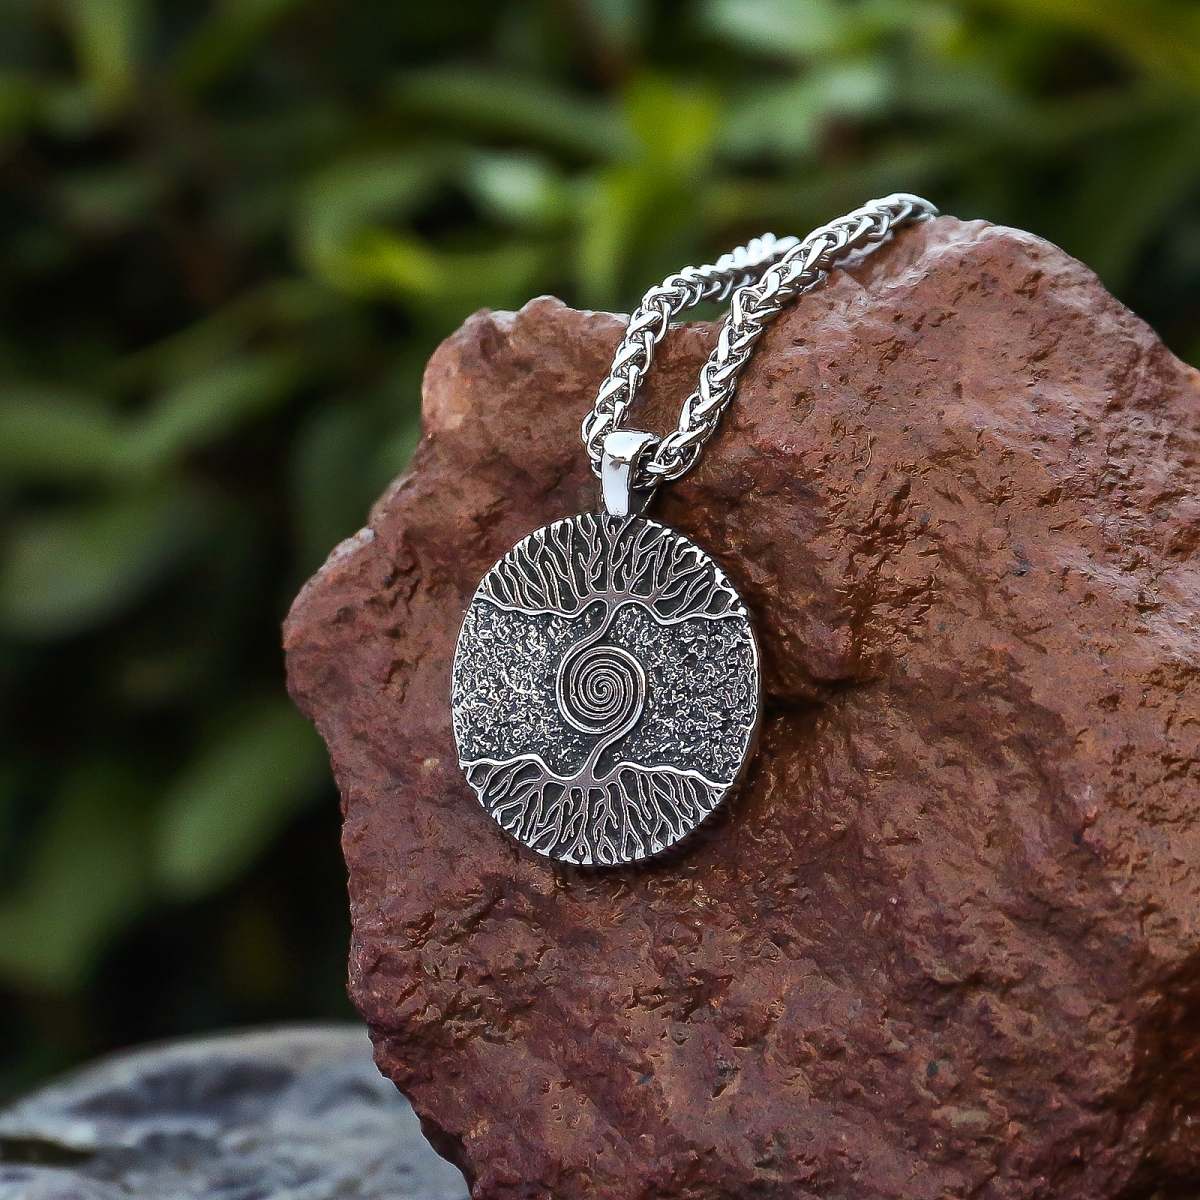 Yggdrasil Tree Necklace US$2.9/PC-NORSECOLLECTION- Viking Jewelry,Viking Necklace,Viking Bracelet,Viking Rings,Viking Mugs,Viking Accessories,Viking Crafts